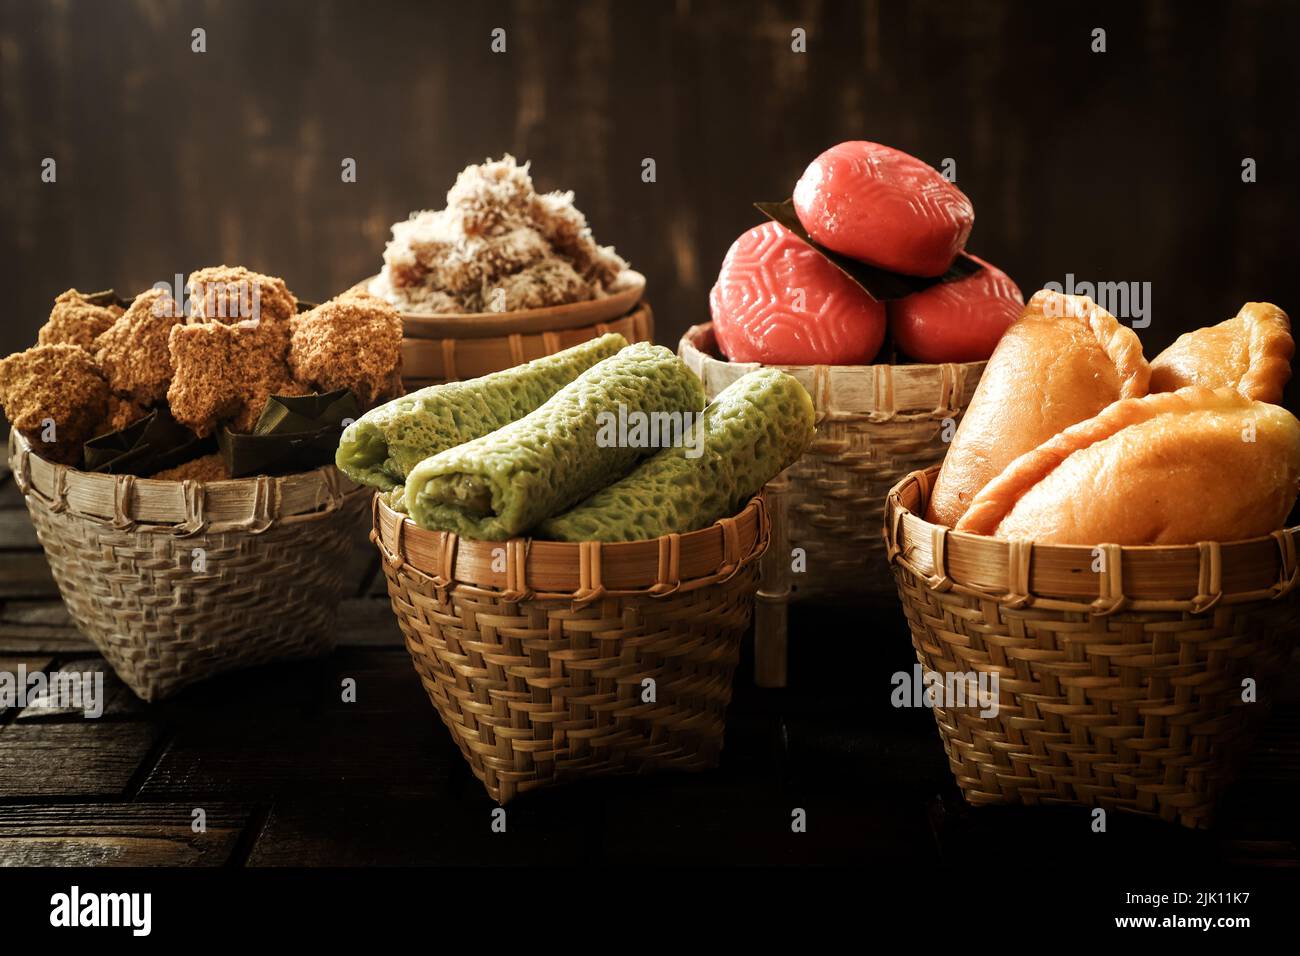 Assorted sweet and savory snacks from Manado, North Sulawesi Stock Photo